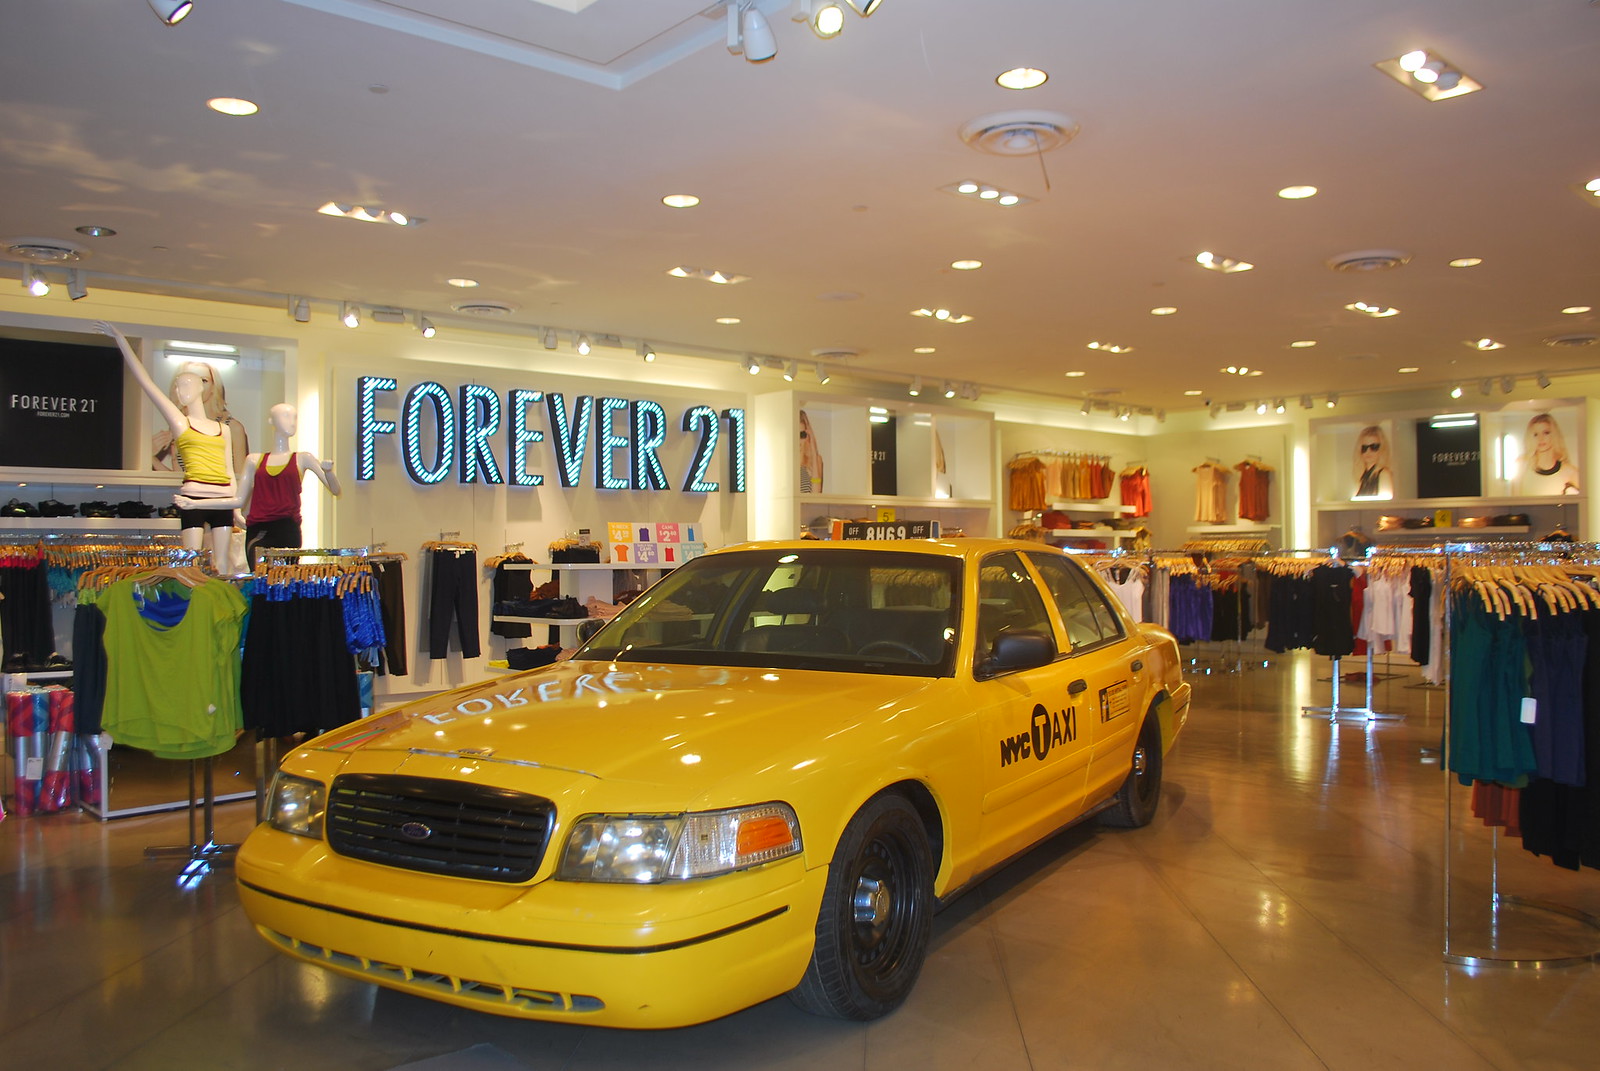 BIGGEST FOREVER 21 IN NYC